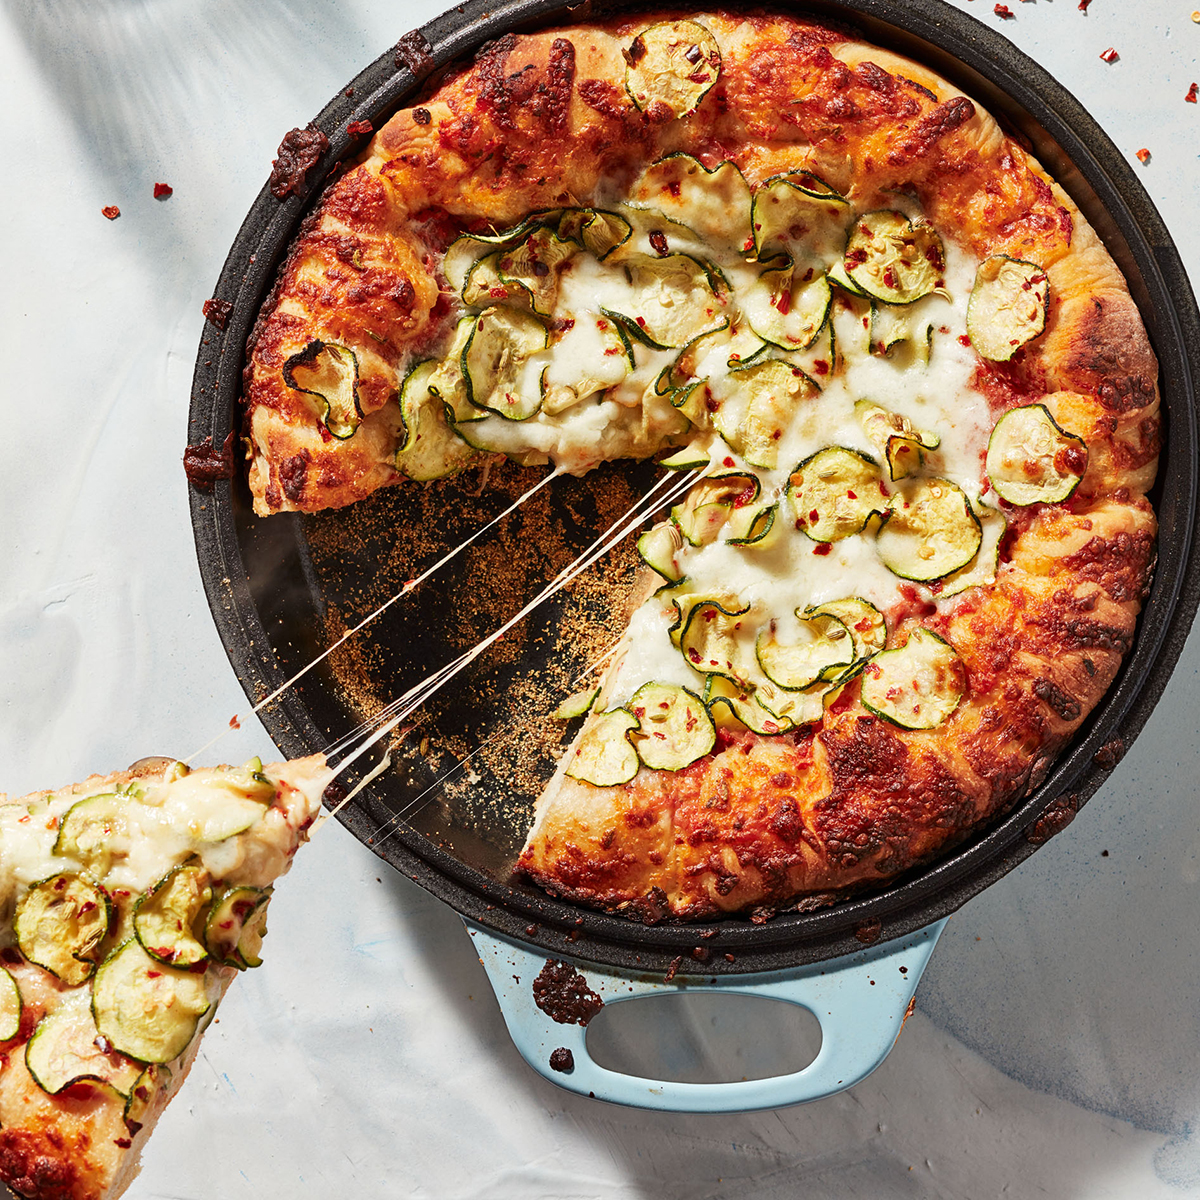 Cast-Iron Skillet Pizza with Zucchini "Pepperoni"